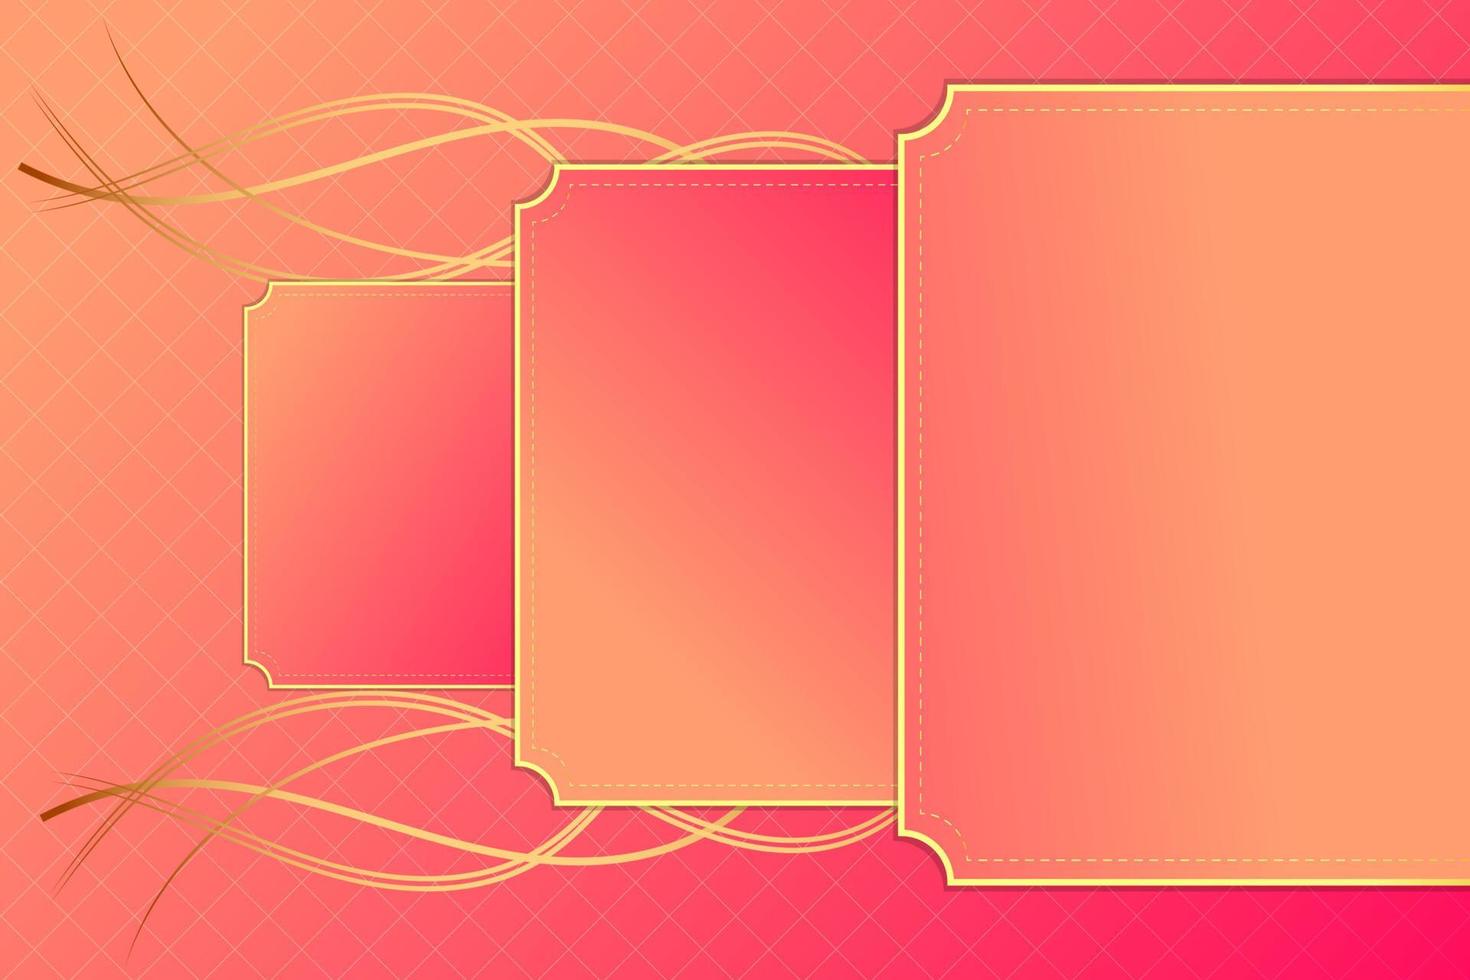 modern luxury abstract background with golden line elements pink gold gradient background modern for design vector